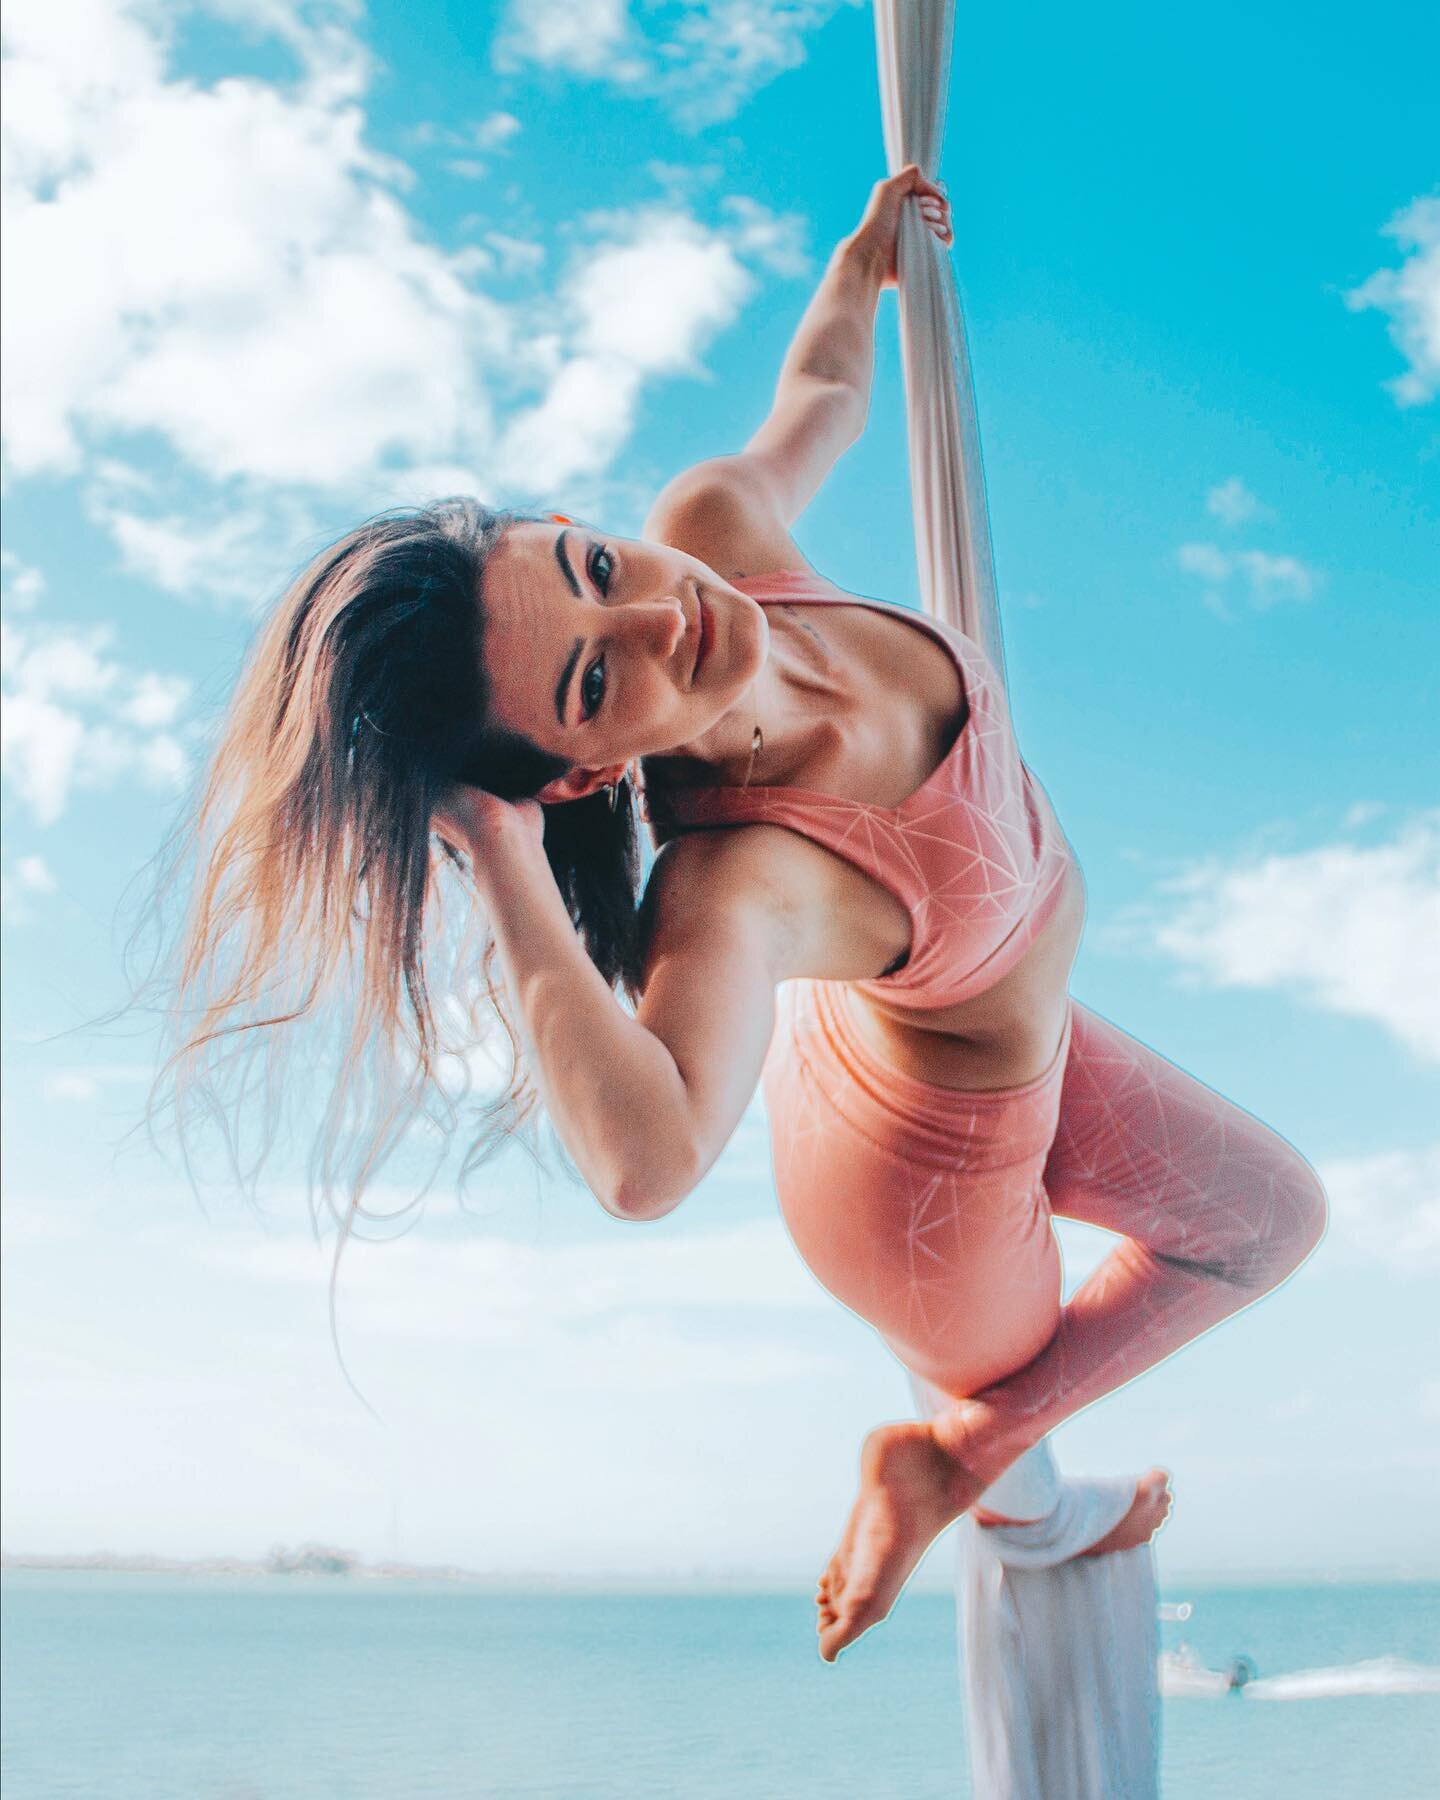 I didn&rsquo;t start aerial because I was confident in my body, or because i was already super strong &amp; flexible.. I started it because I wasn&rsquo;t those things. 
⠀⠀⠀⠀⠀⠀⠀⠀⠀
I get the same comments when I encourage people to try aerial arts: 
⠀